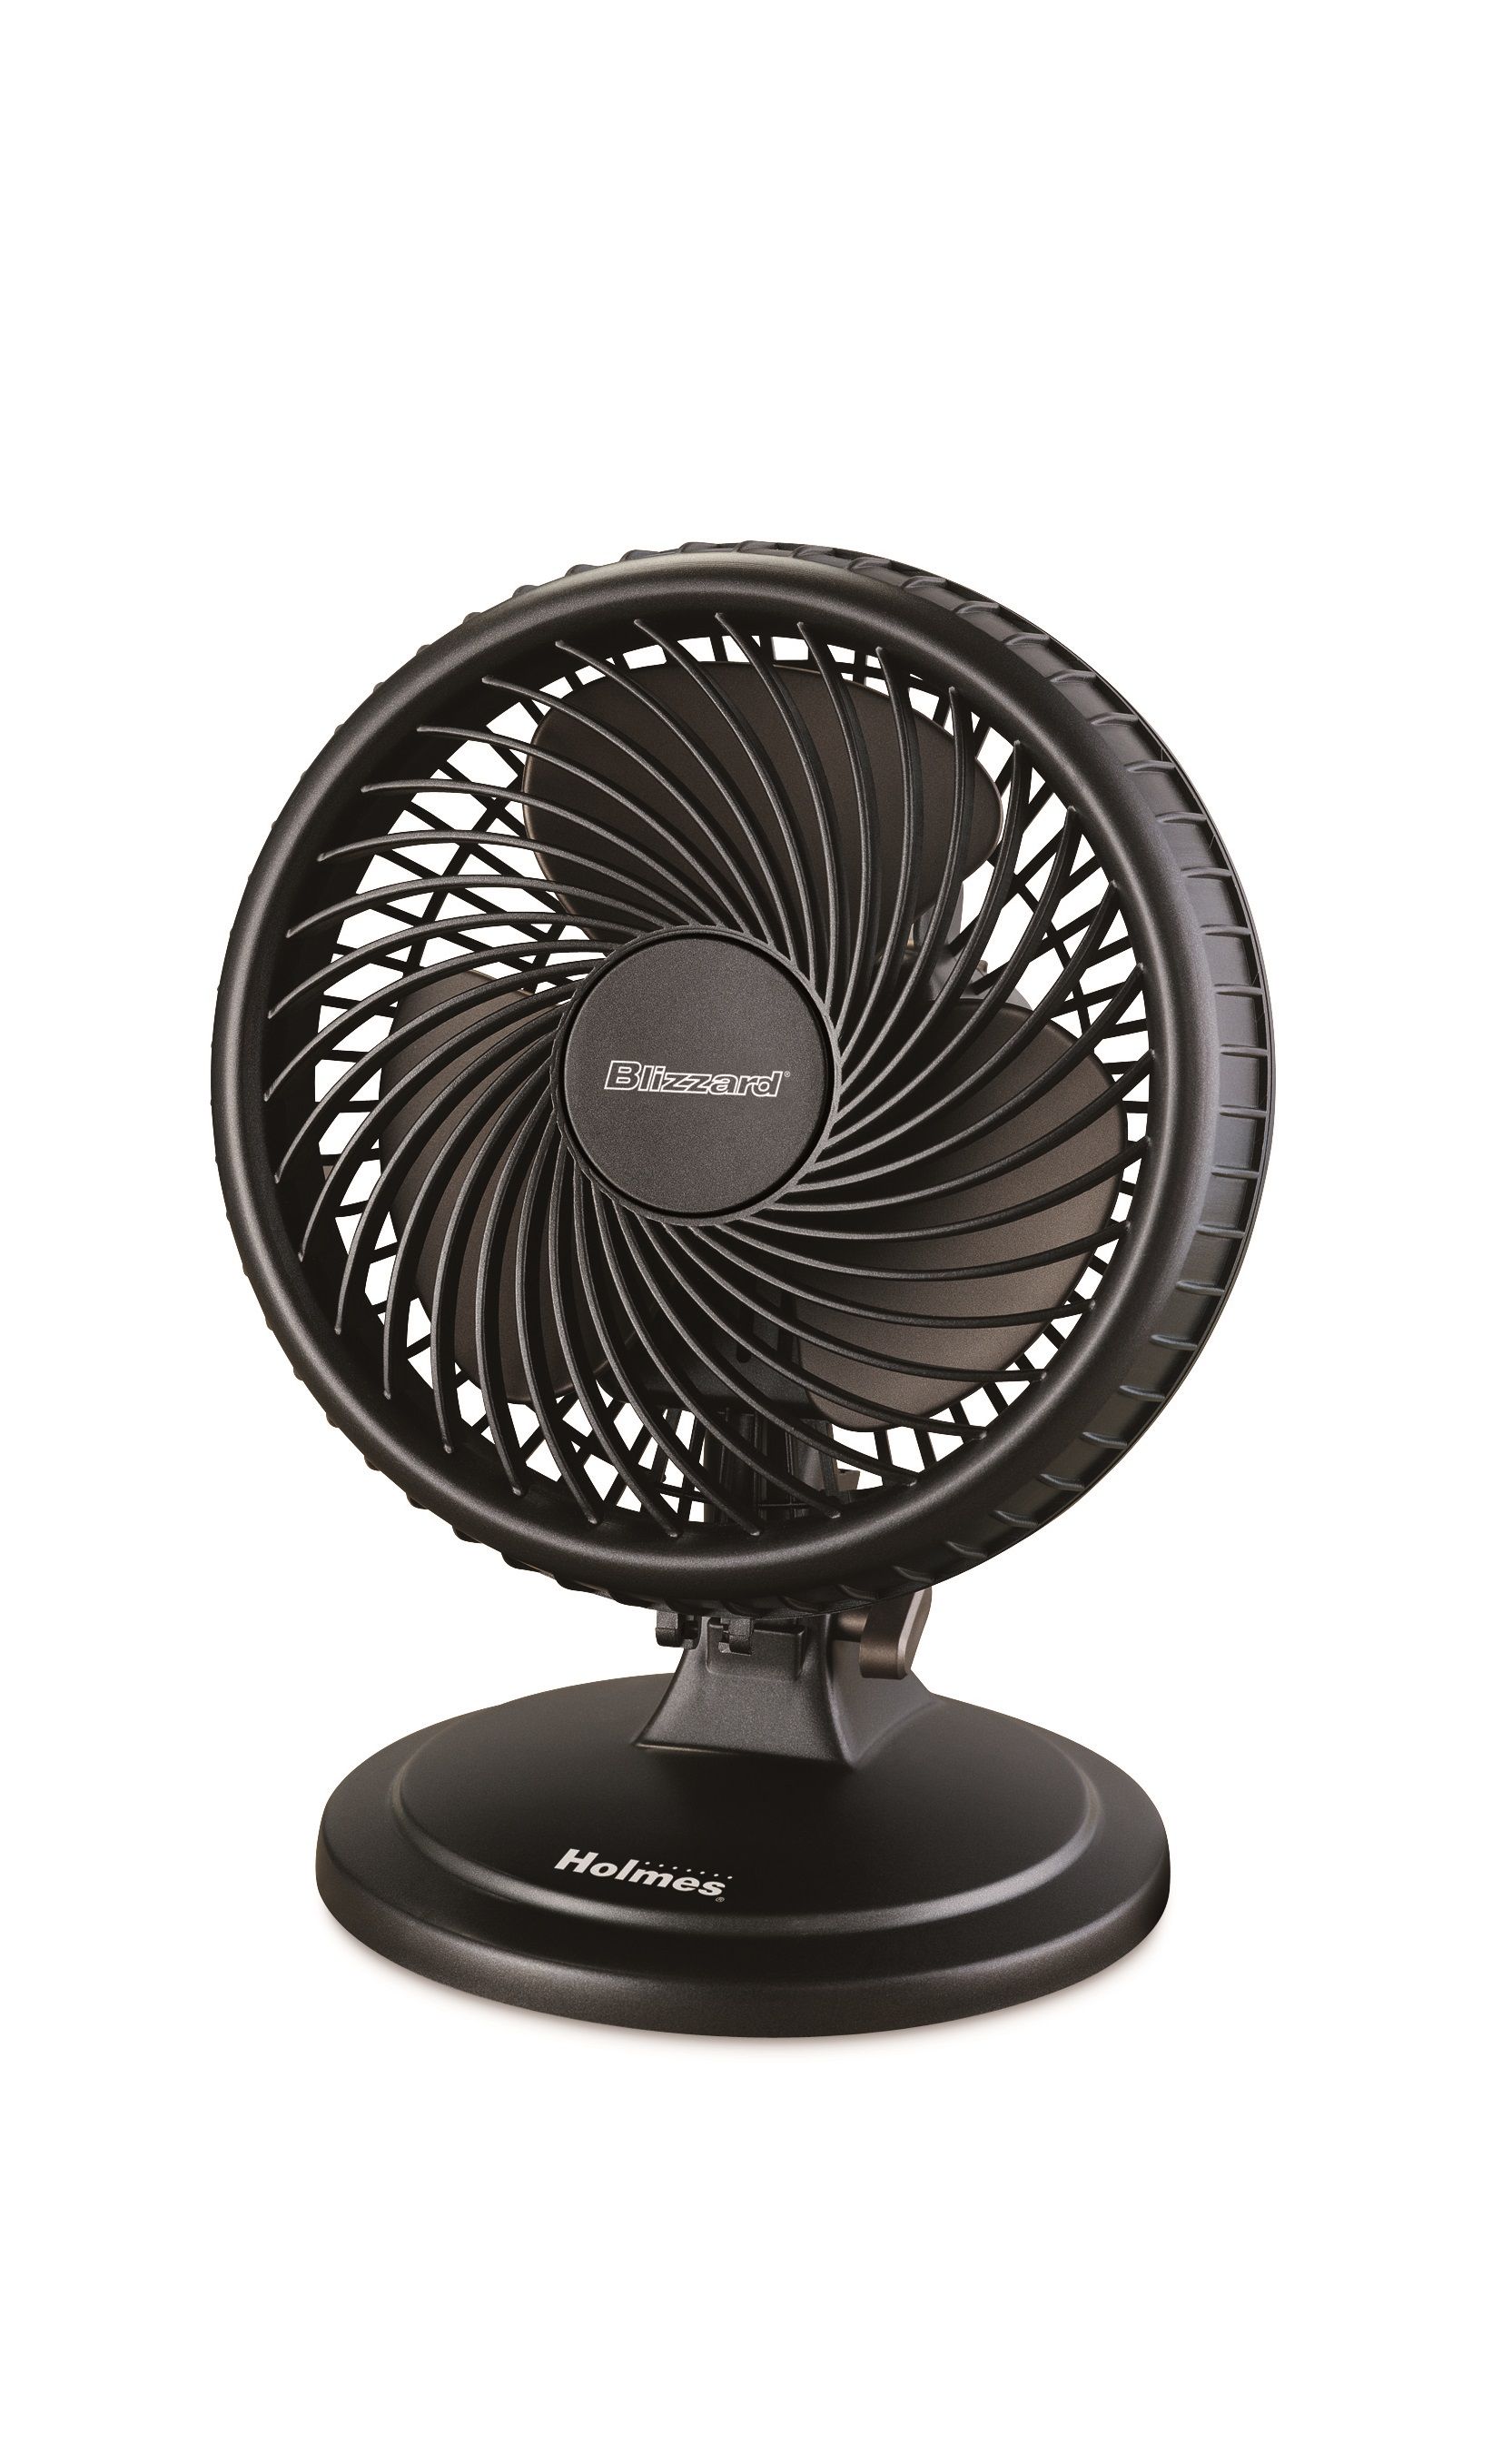 The Best Table And Desk Fans According To Experts The